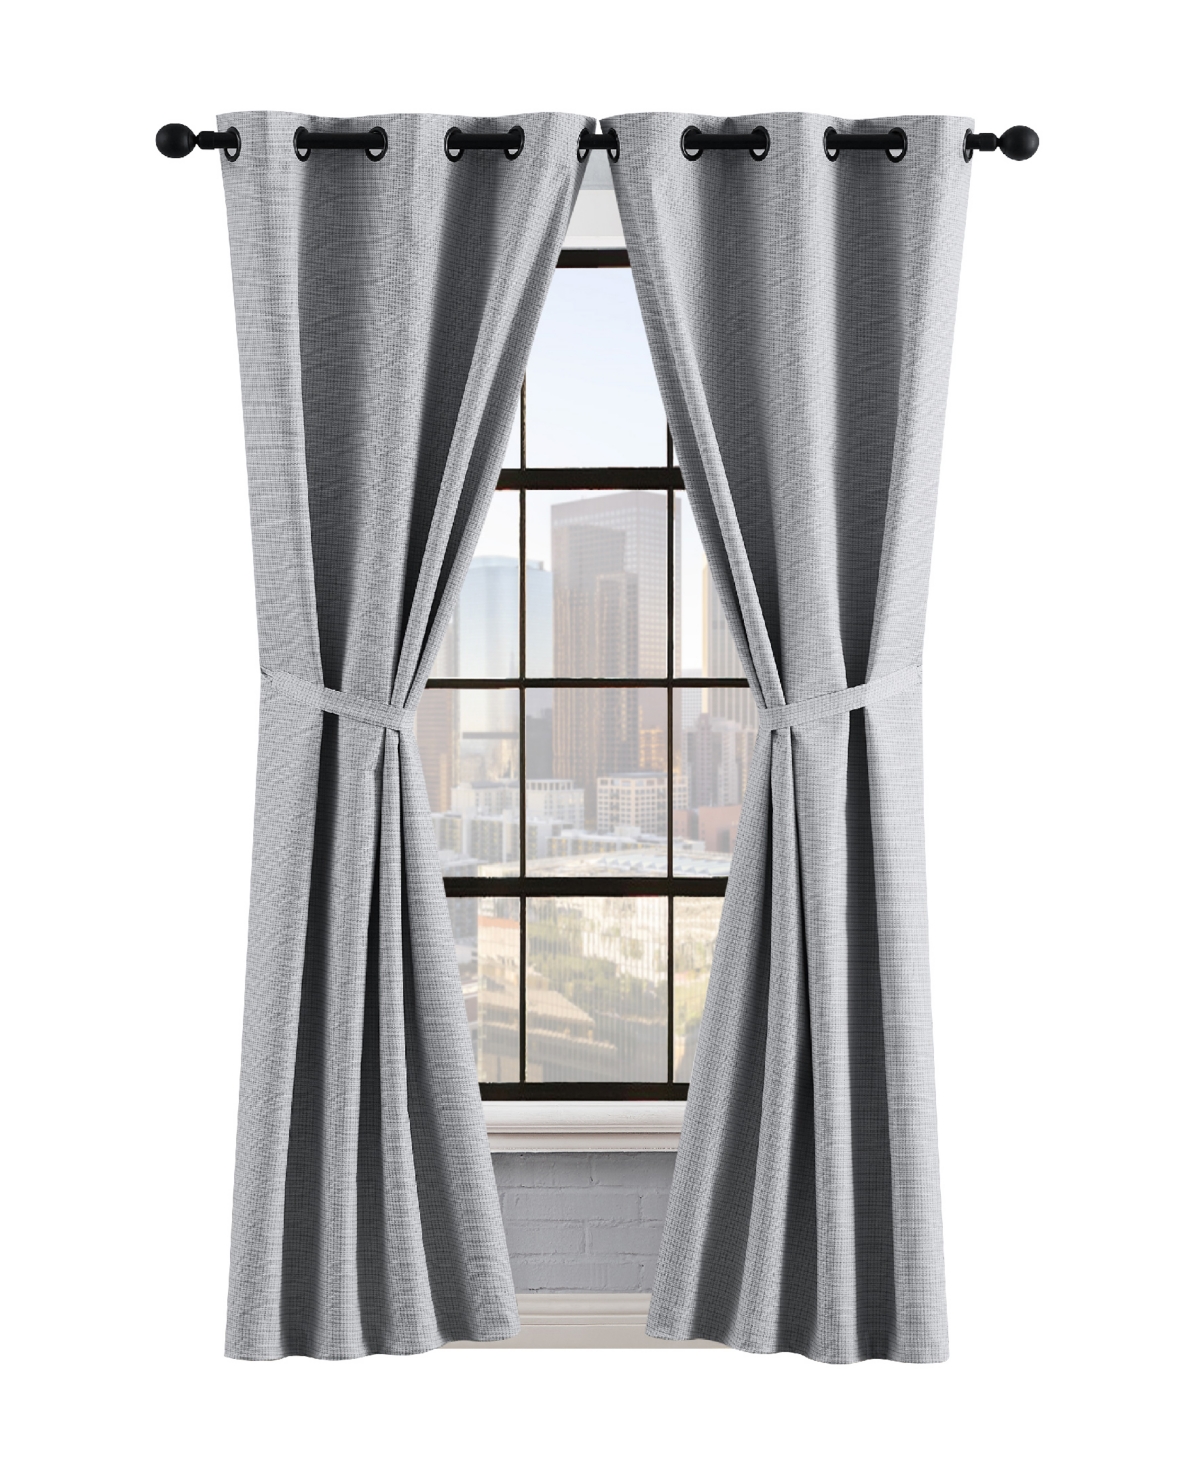 Lucky Brand Finley Textured Blackout Grommet Window Curtain Panel Pair With Tiebacks, 38" X 96" In Light Gray